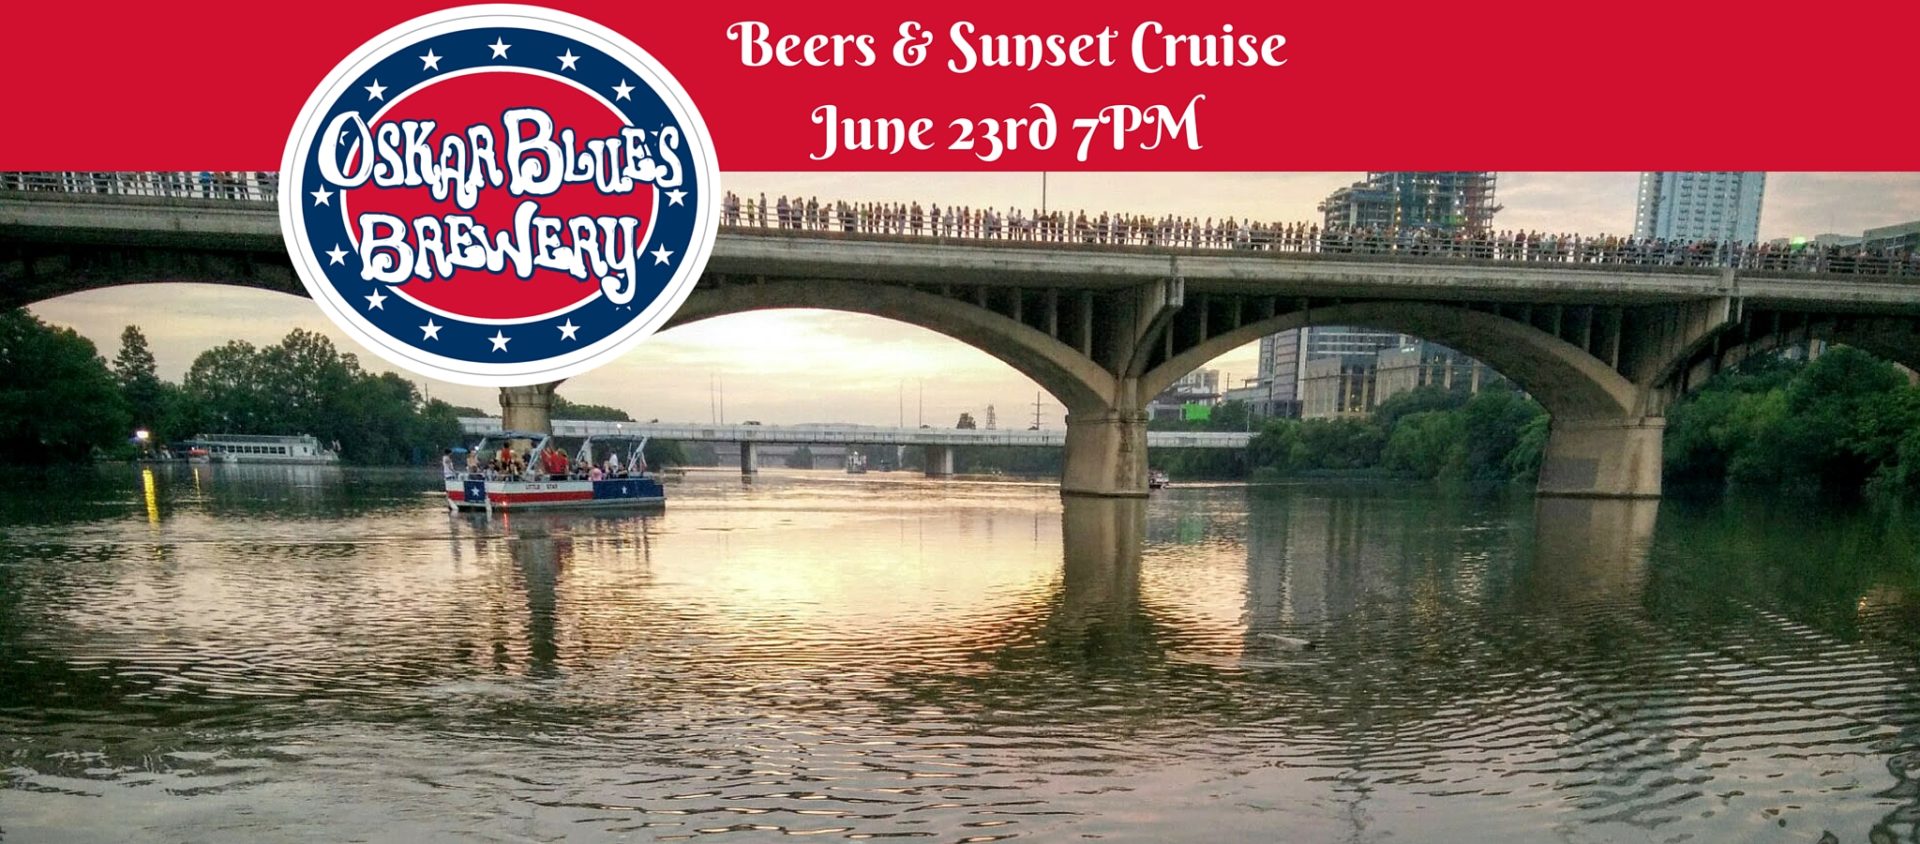 Beers & Sunset Cruise June 23rd 7PM Austin Craft Beer Events June 20th - 26th 2016